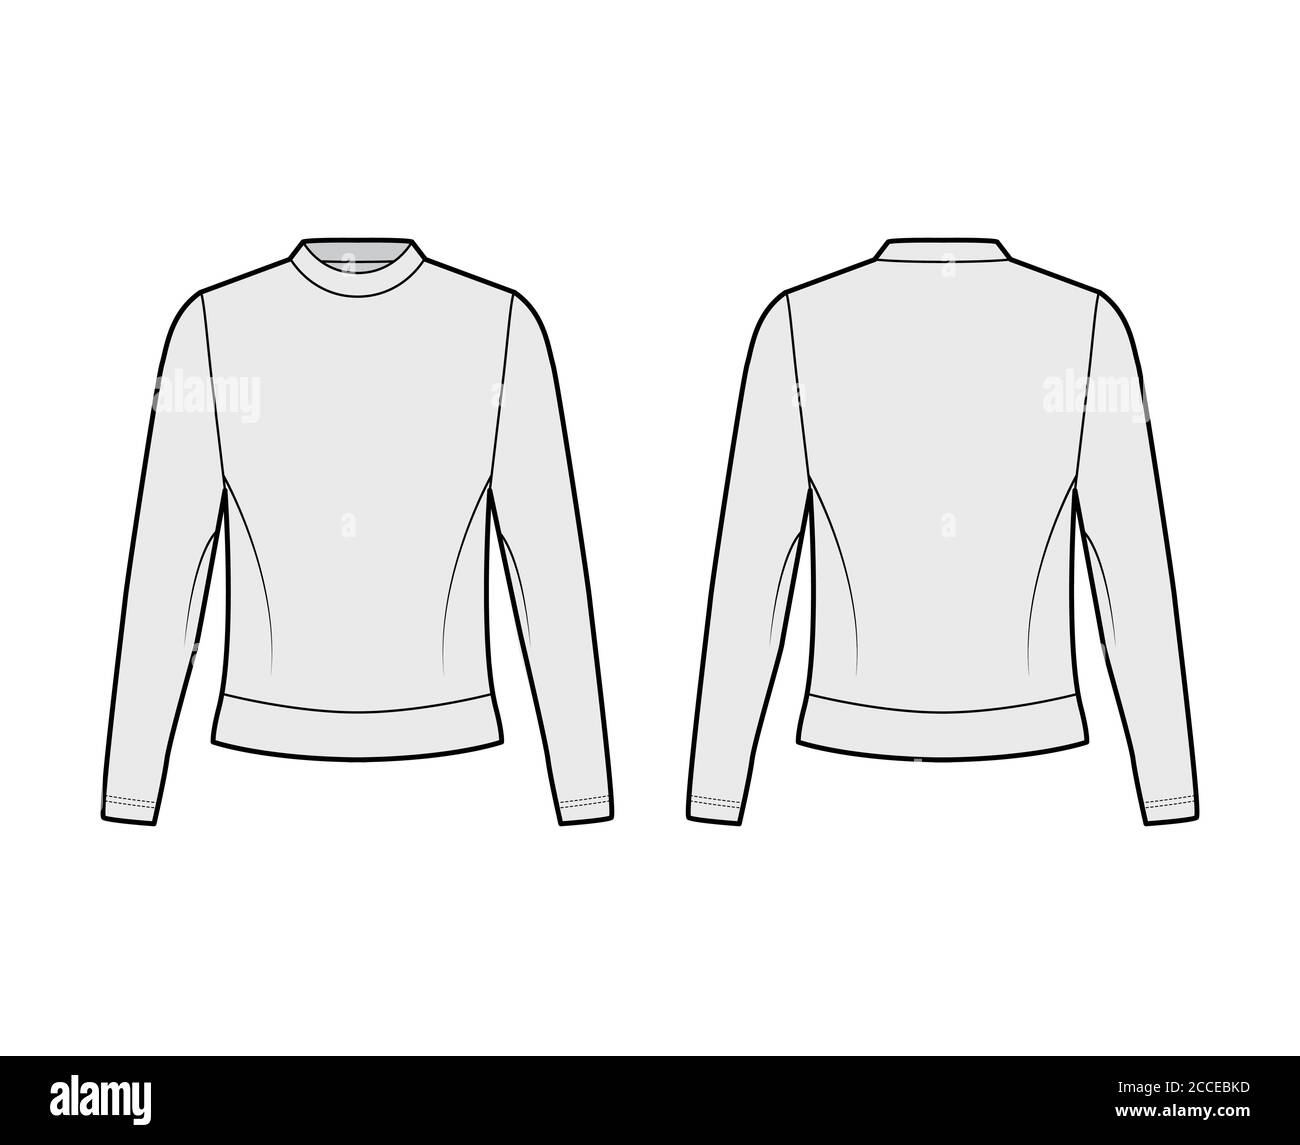 Cotton-terry sweatshirt technical fashion illustration with crew neckline, long sleeves, oversized. Flat jumper apparel outwear template front, back, grey color. Women, men, unisex top CAD mockup Stock Vector